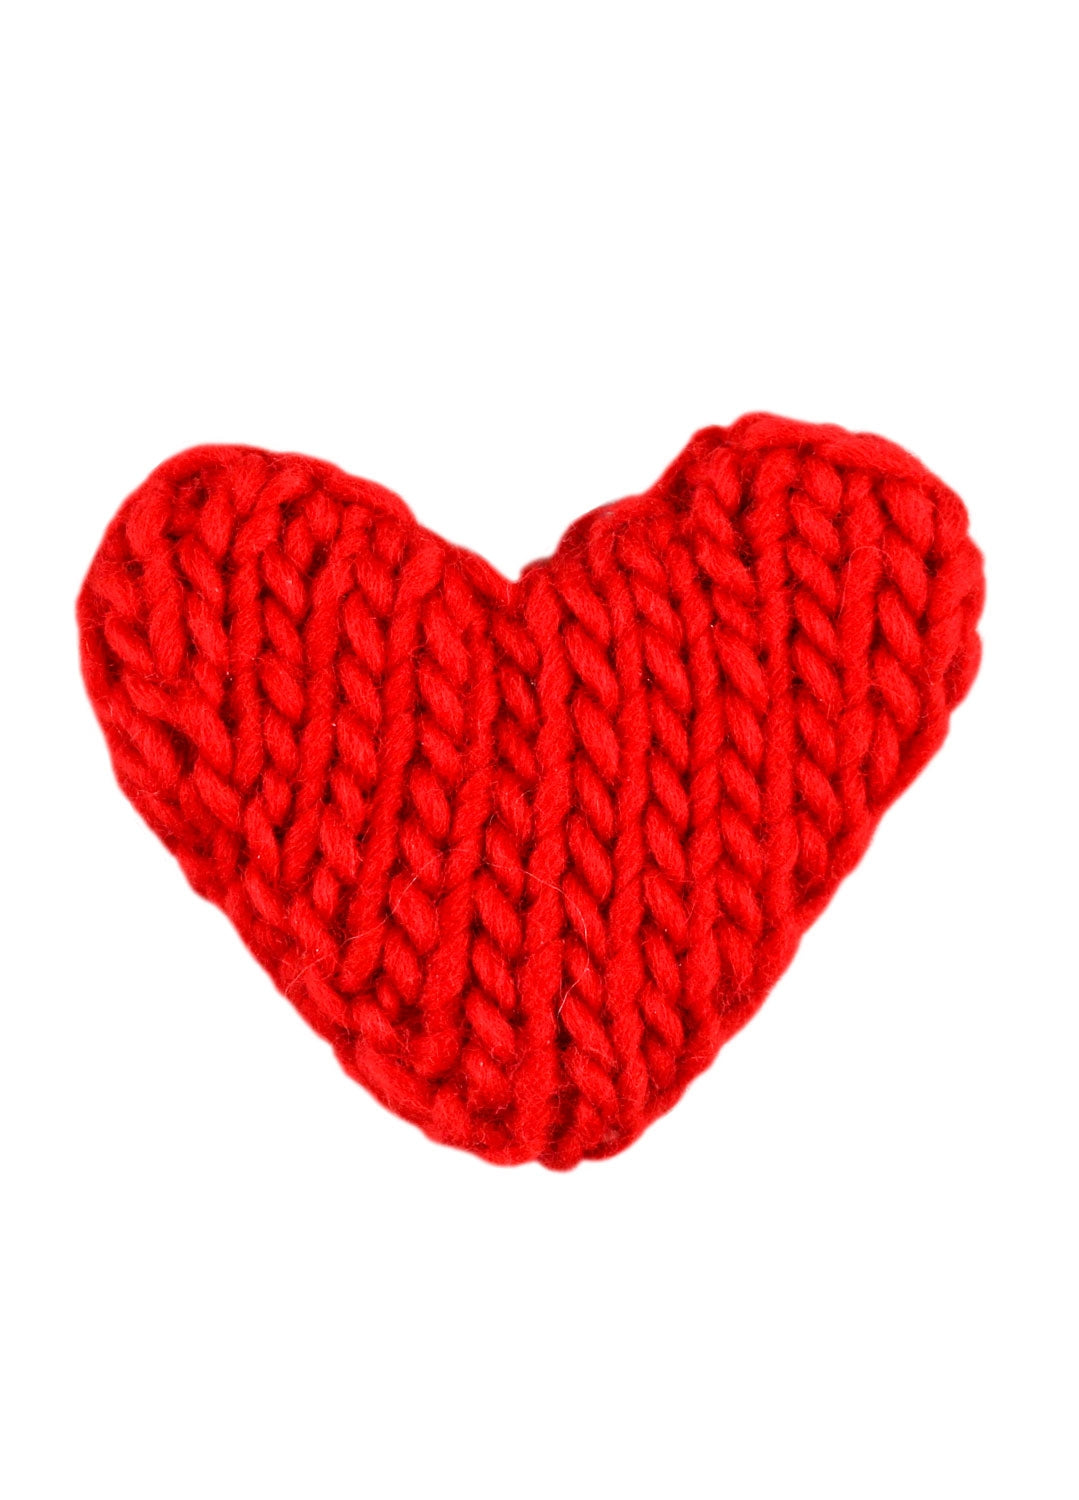 14 Free Heart Knitting Patterns to Make for your Valentines —  Blog.NobleKnits